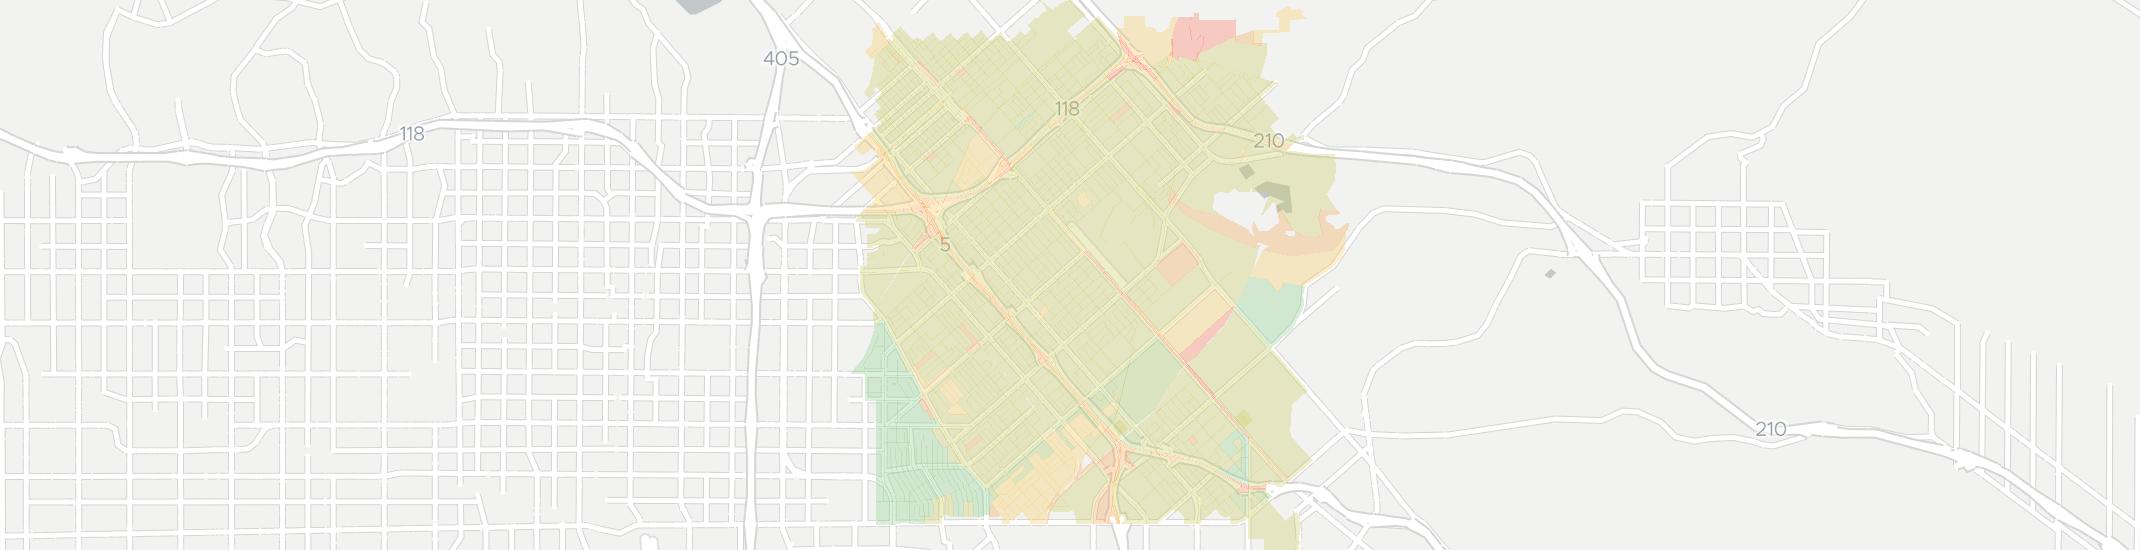 Pacoima Internet Competition Map. Click for interactive map.